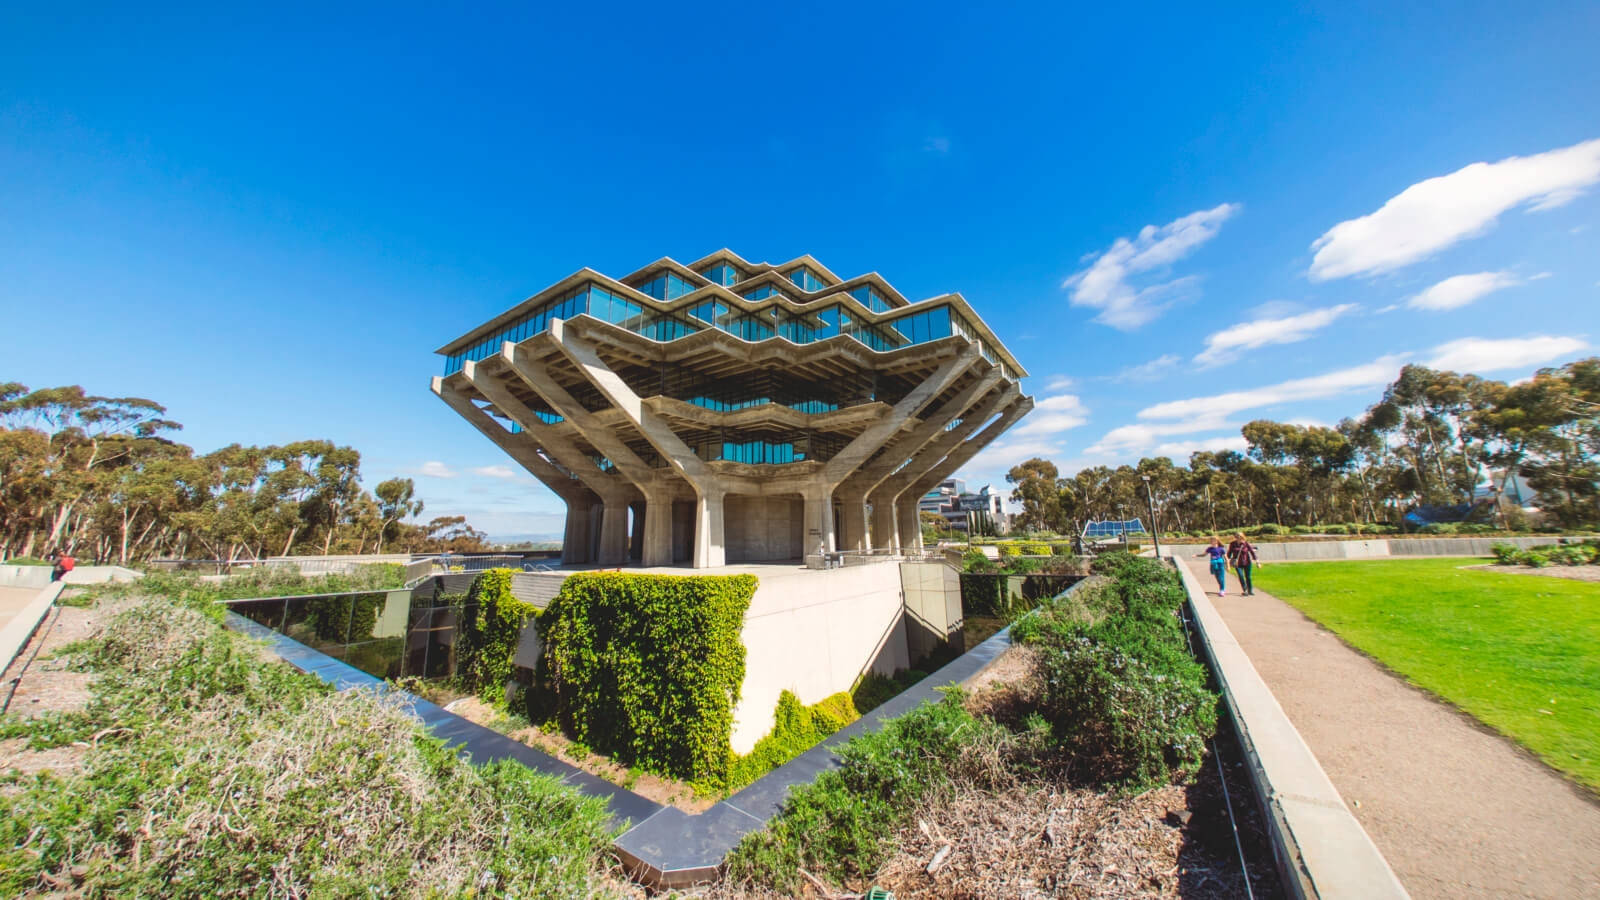 Students Pathway Ucsd Wallpaper